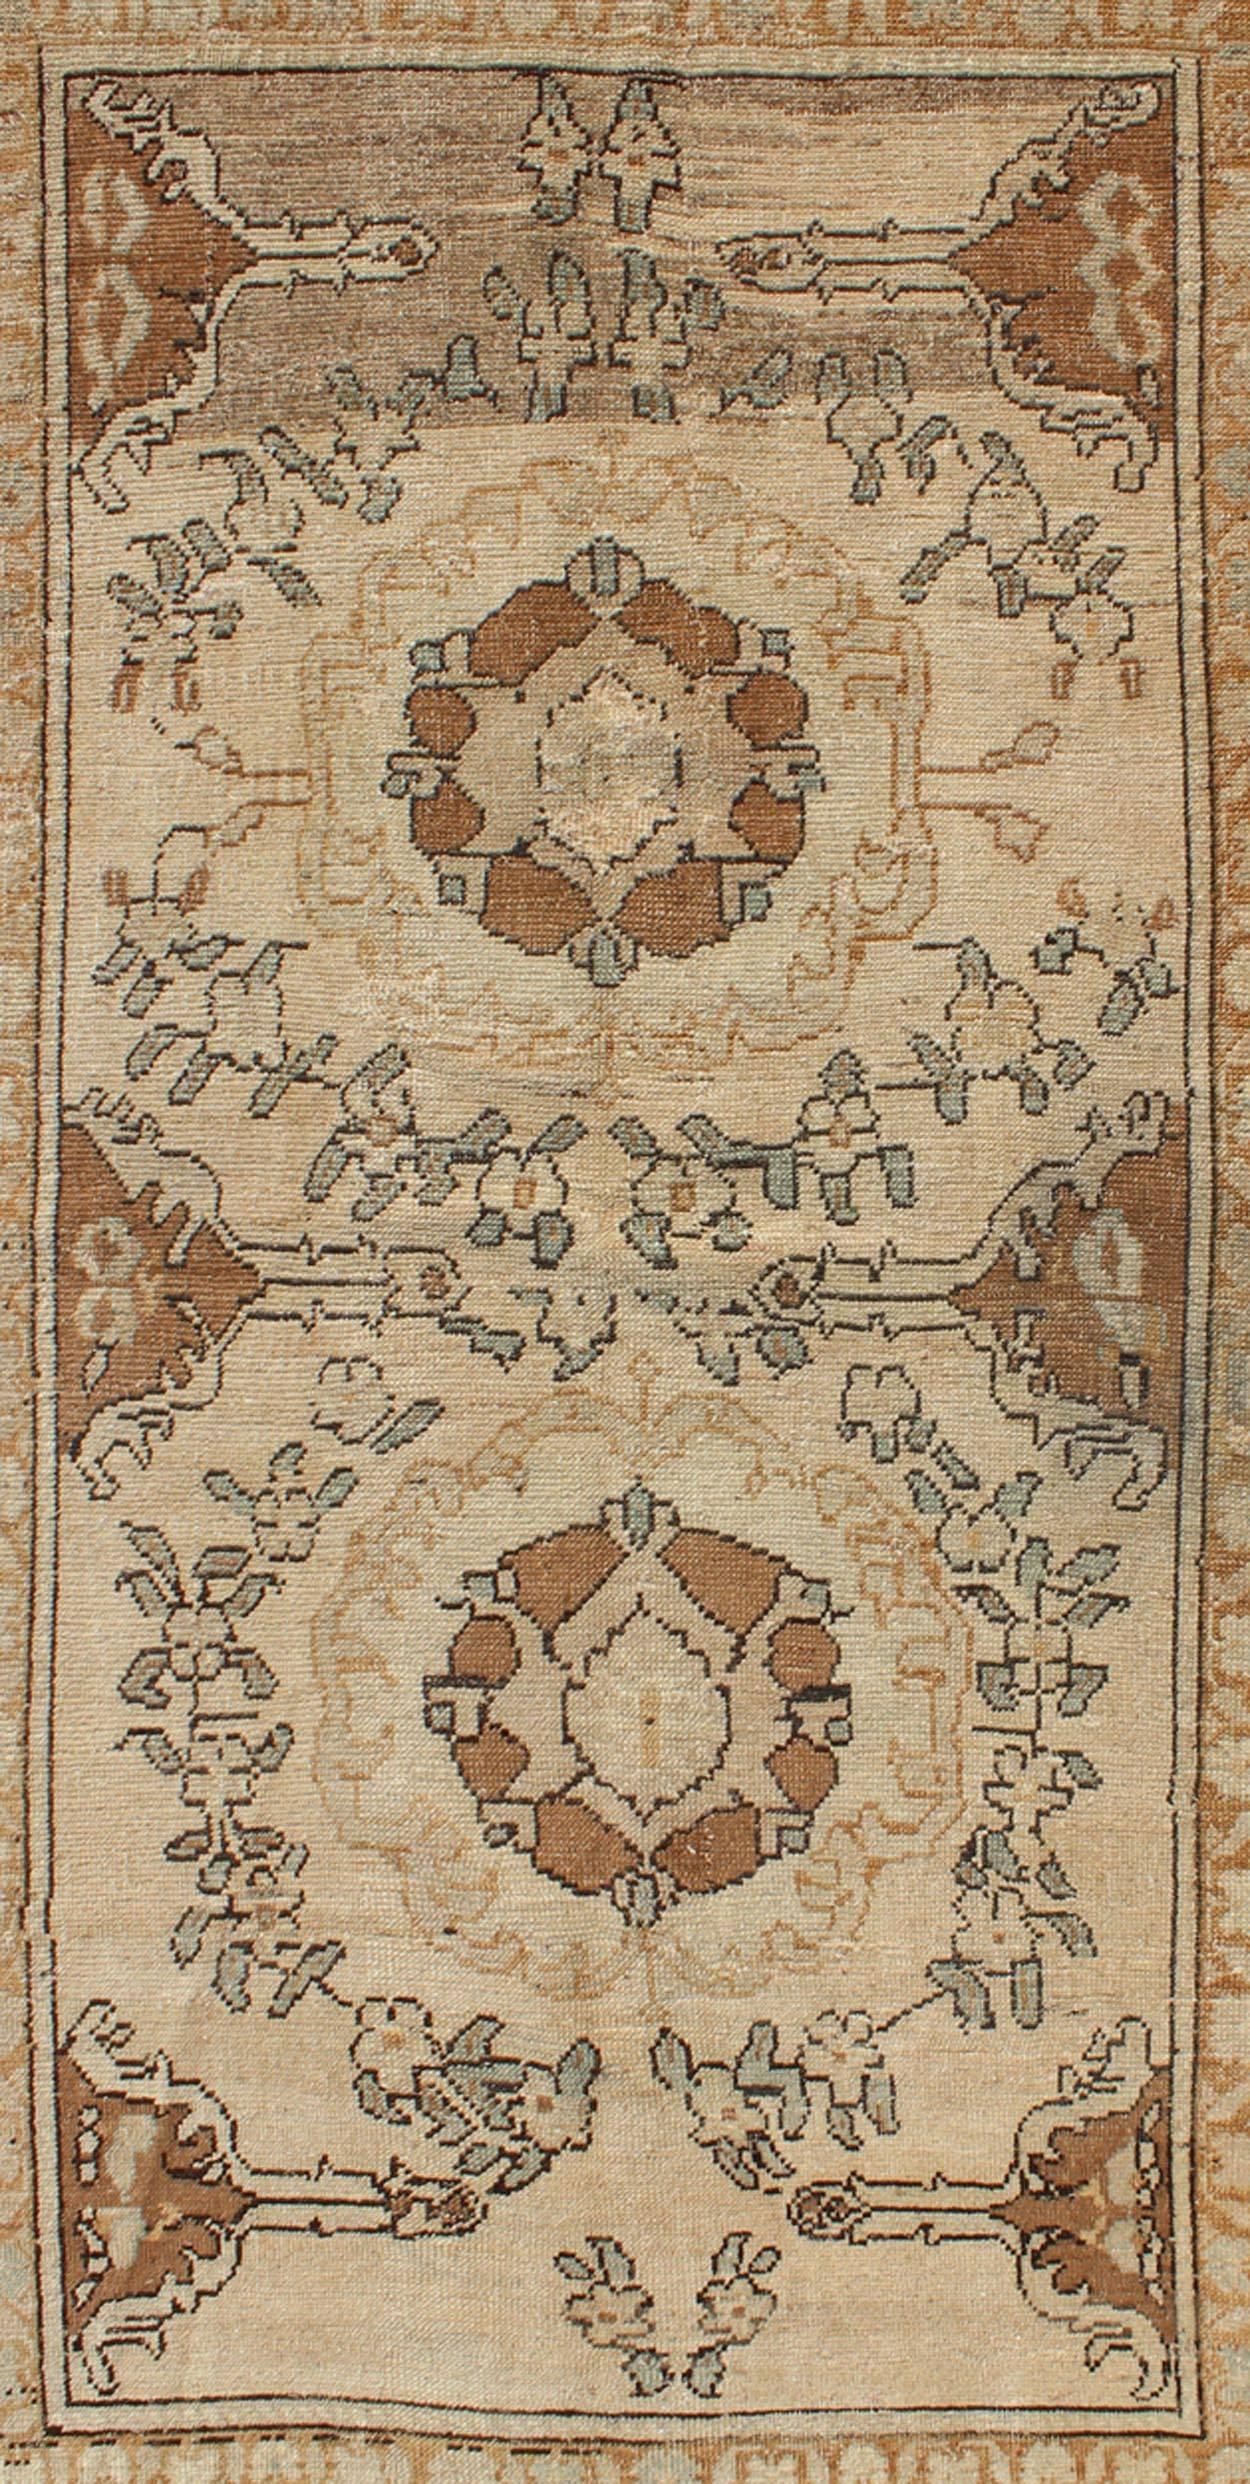 Hand-Knotted Dual Medallion Vintage Turkish Oushak Rug with Floral Accents in Brown and Gray